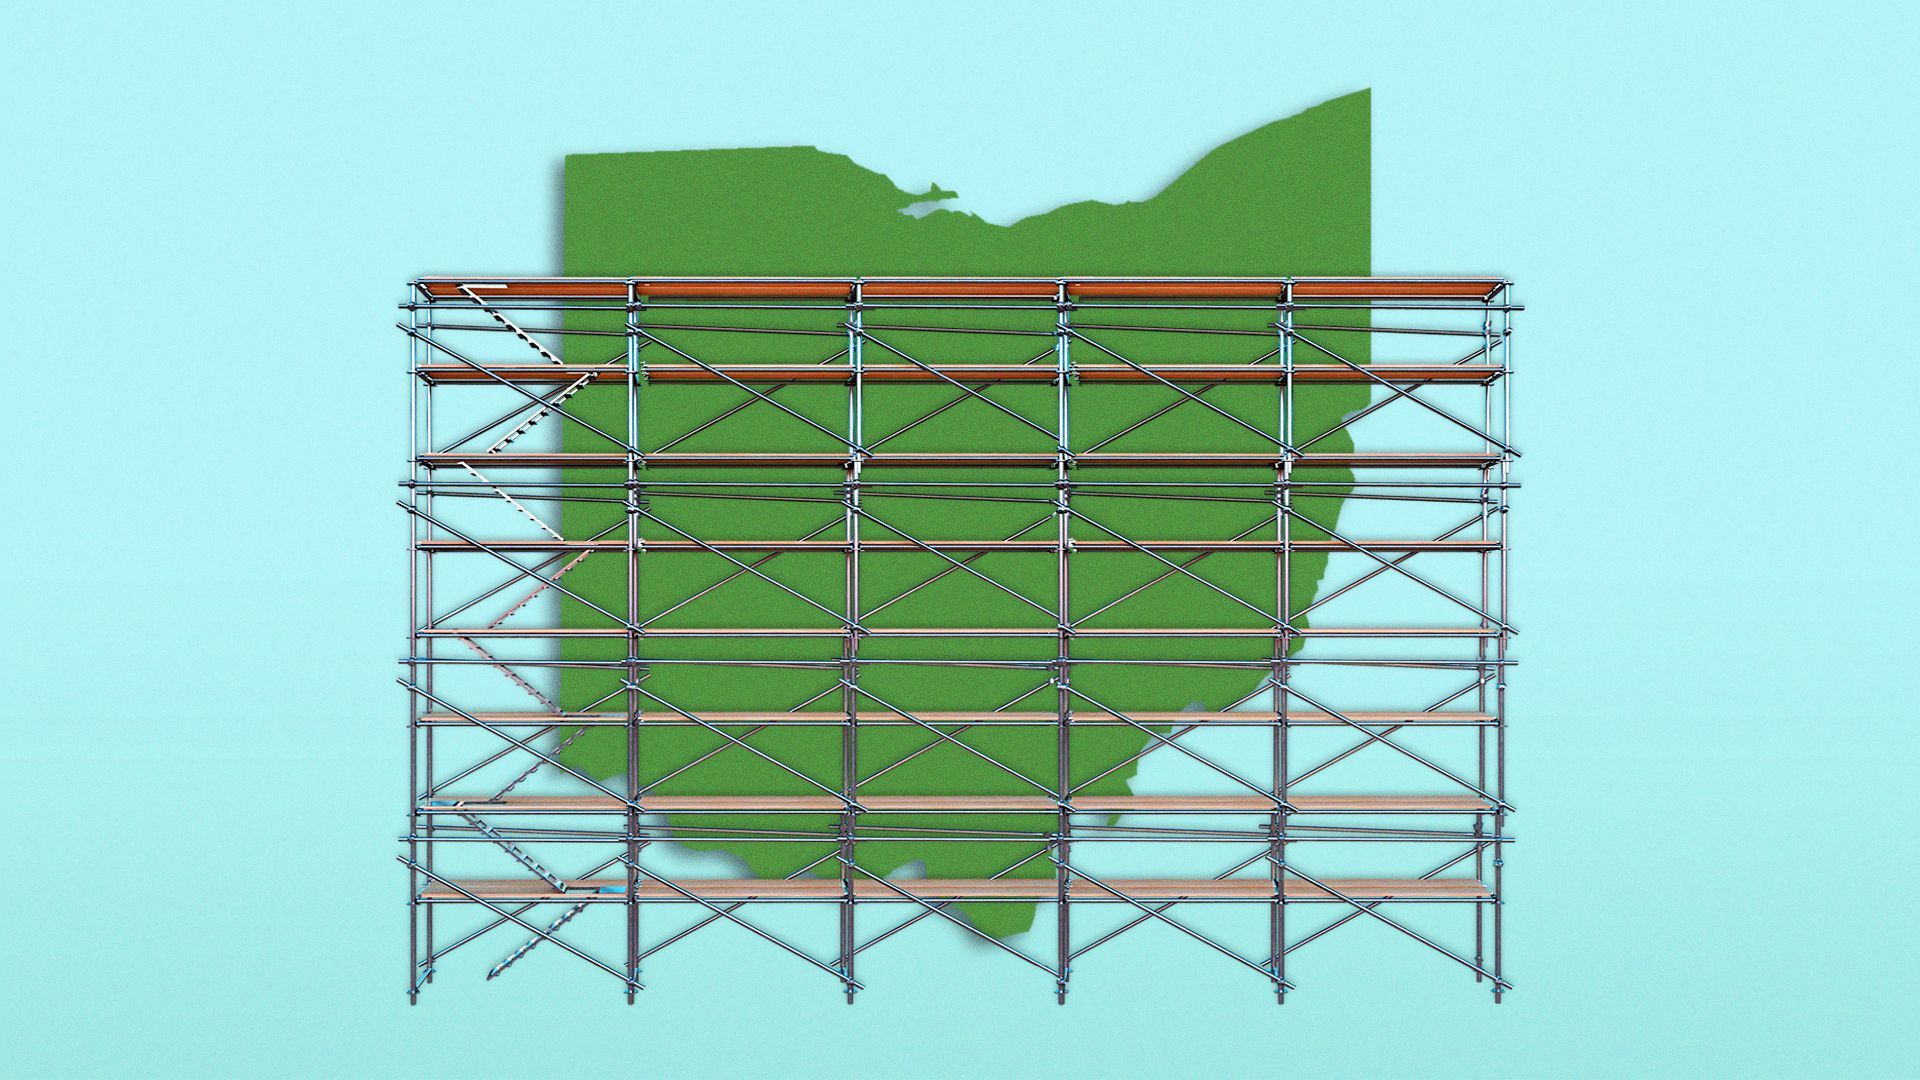 Illustration of the state of Ohio, with scaffolding in front.